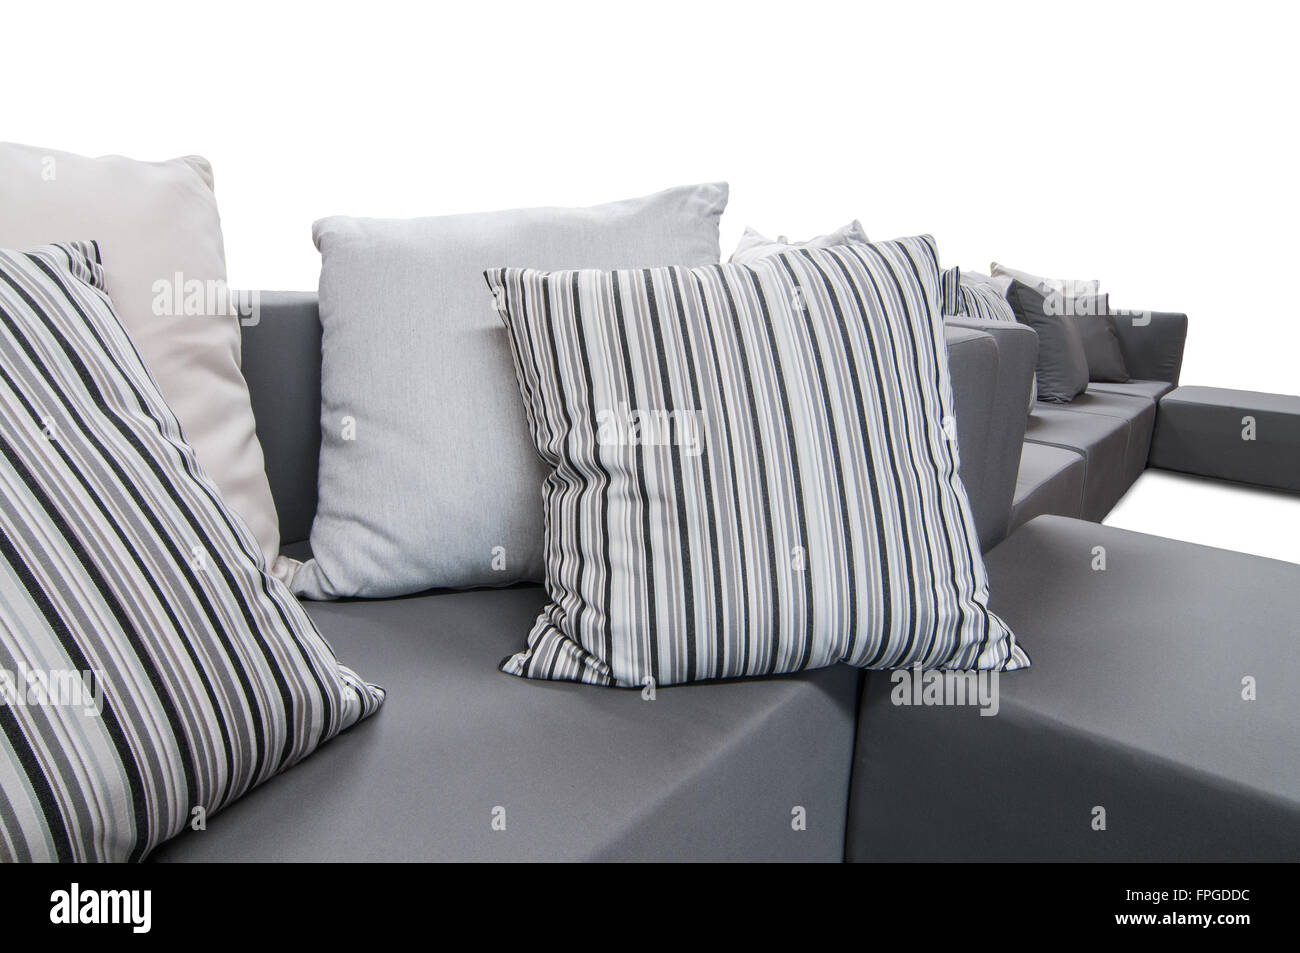 Outdoor indoor sofa with water resistant cushions and pillows Stock Photo